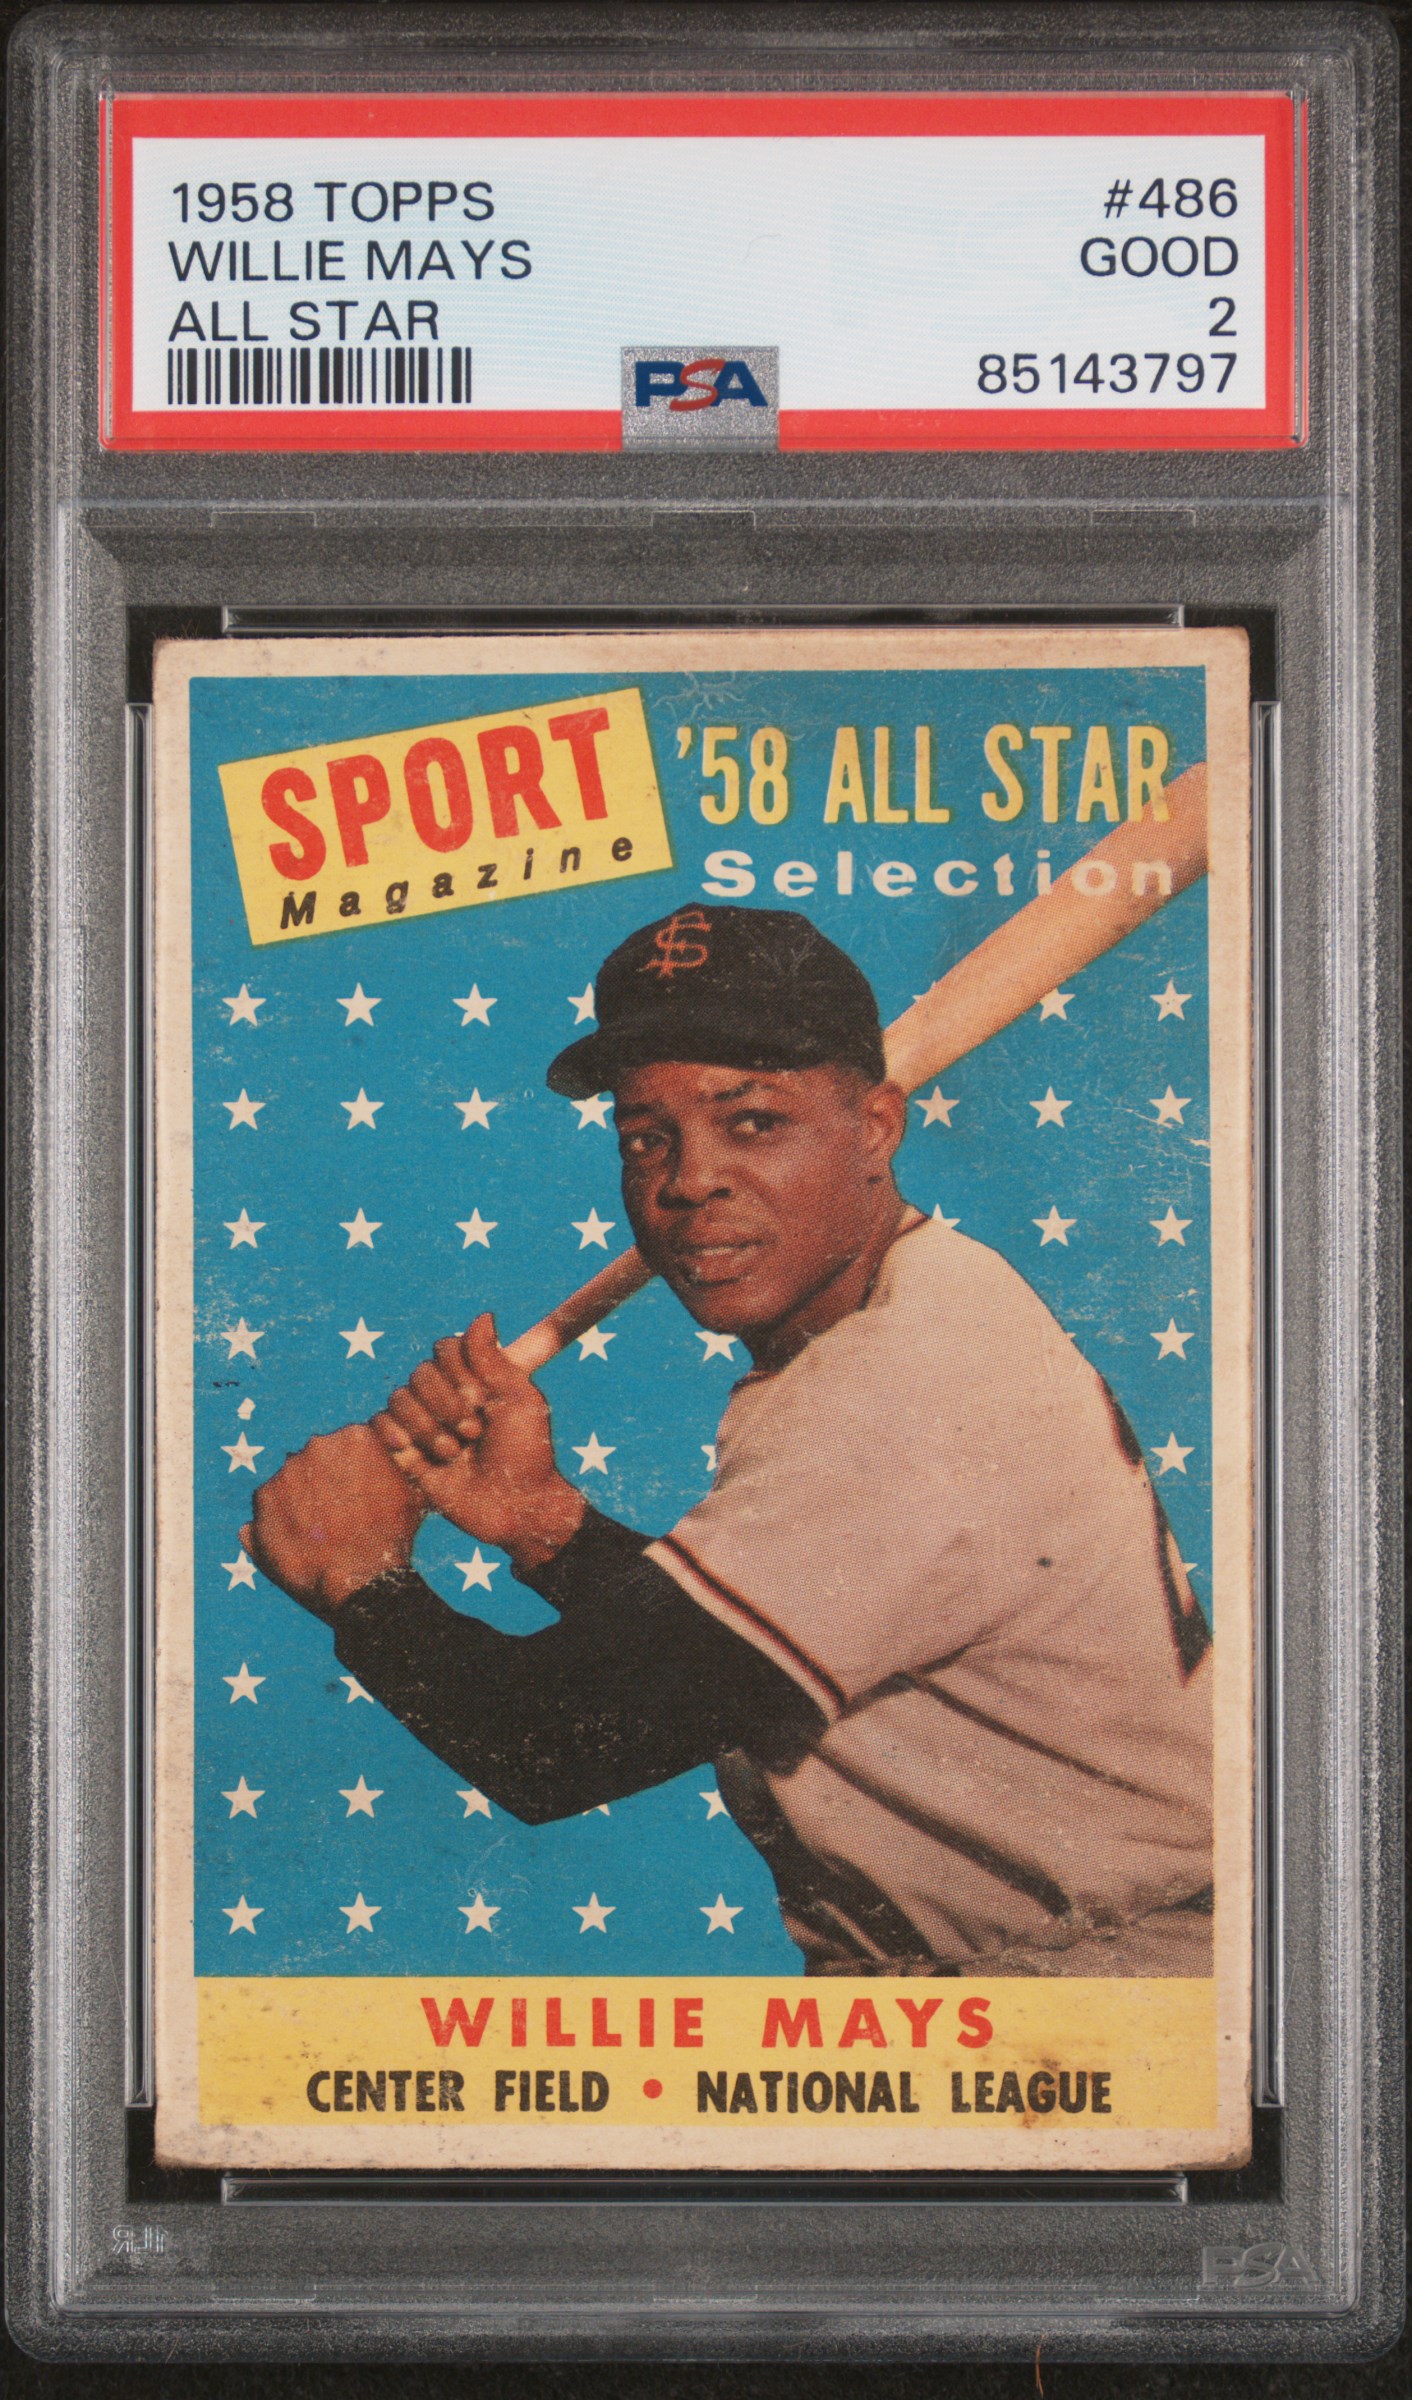 1958 Topps All Star #486 Willie Mays – PSA GD 2